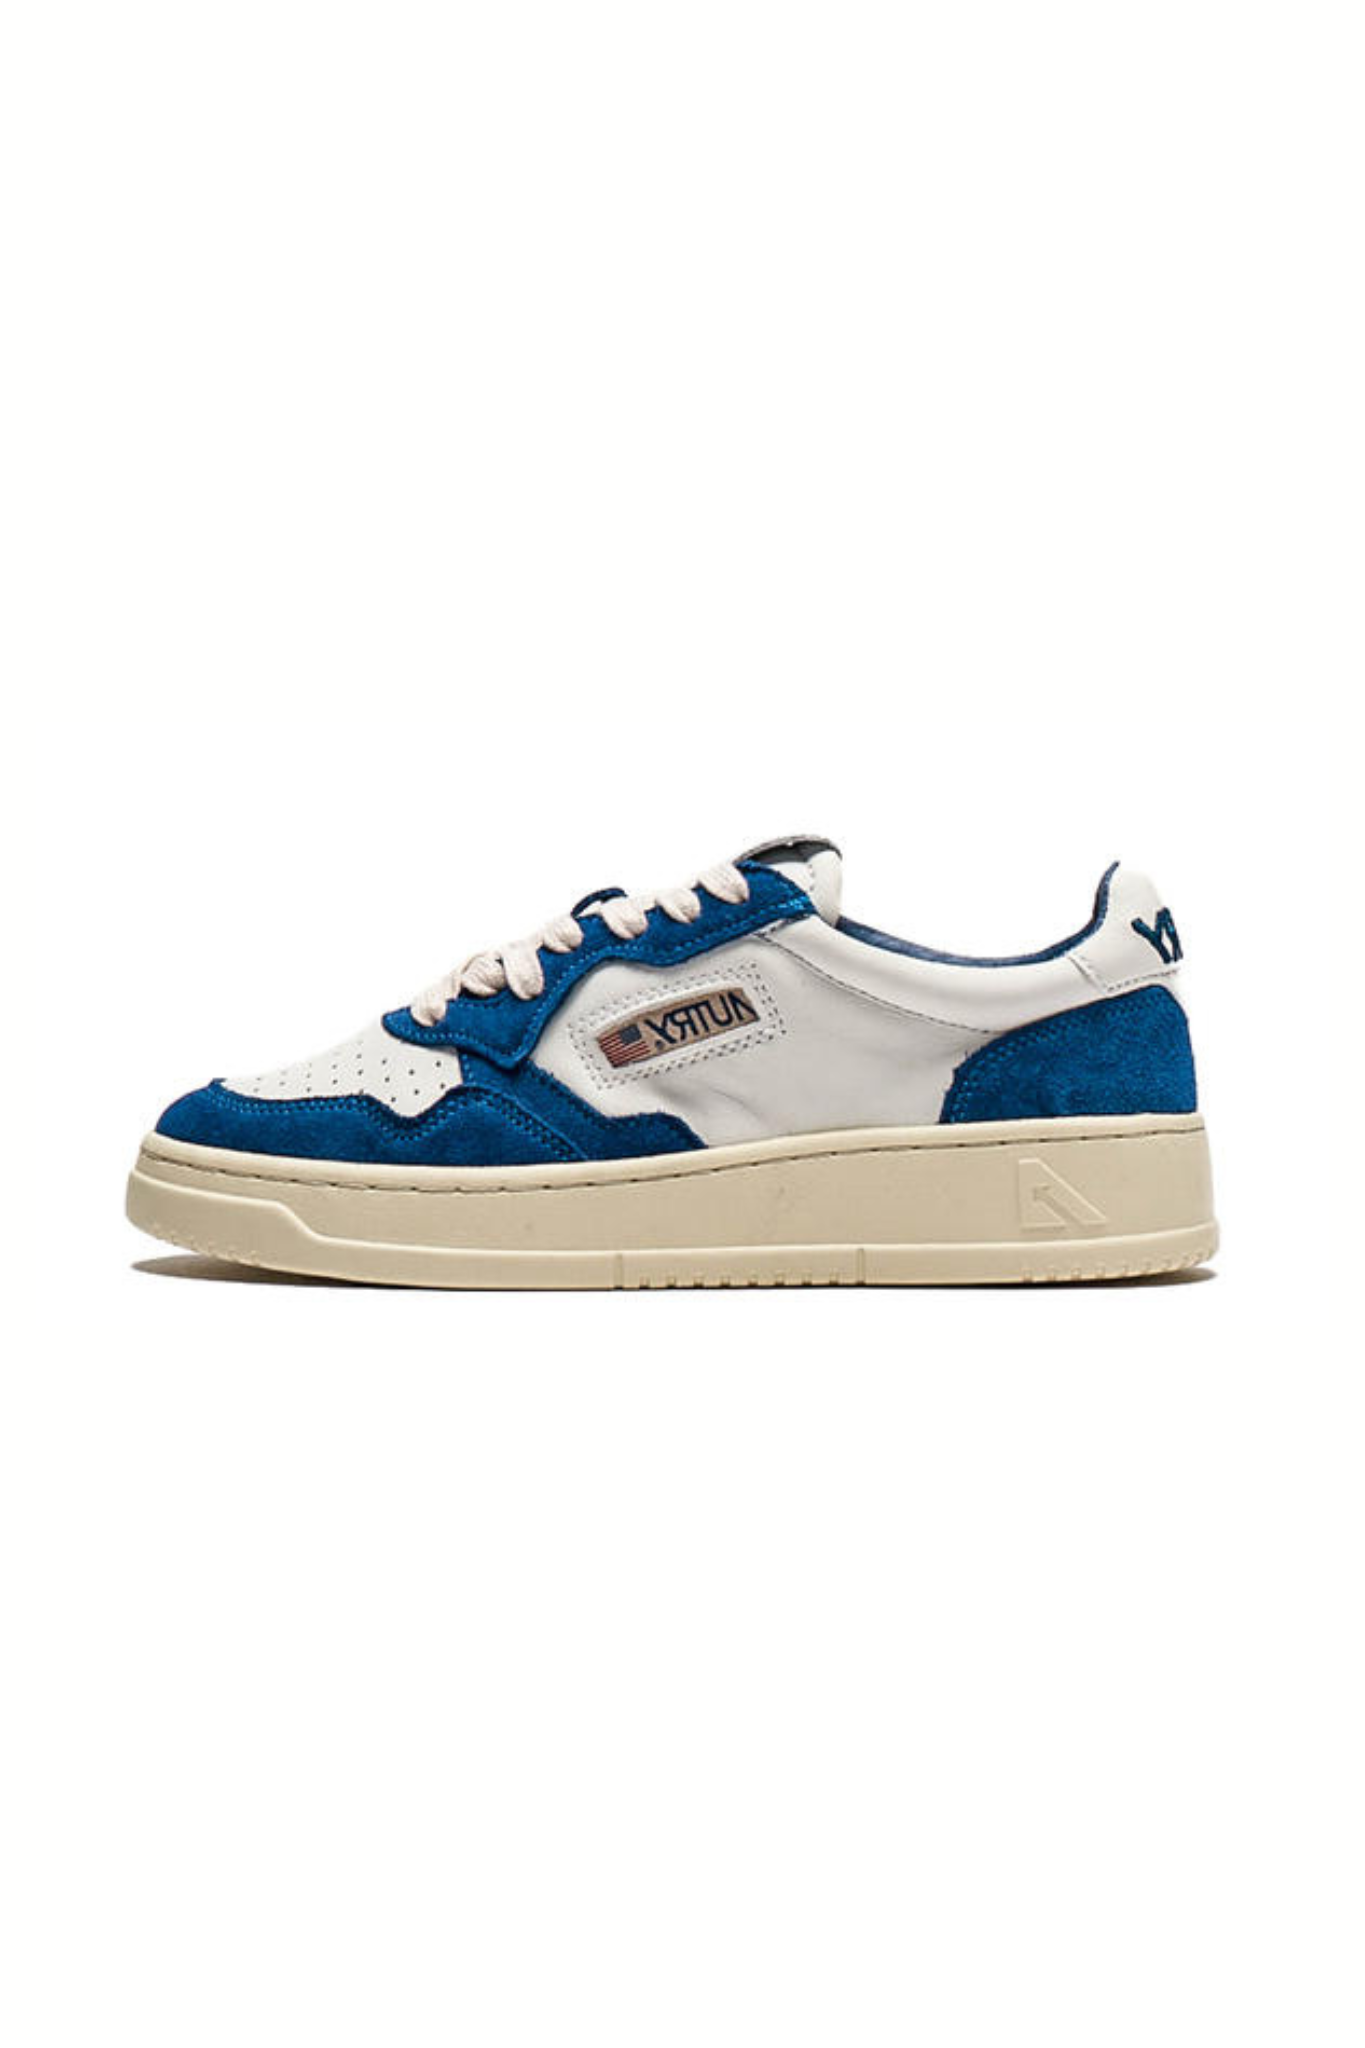 AOLM-CE16 - OPEN LOW SNEAKERS IN LEATHER AND SUEDE COLOR ACADEMY BLUE